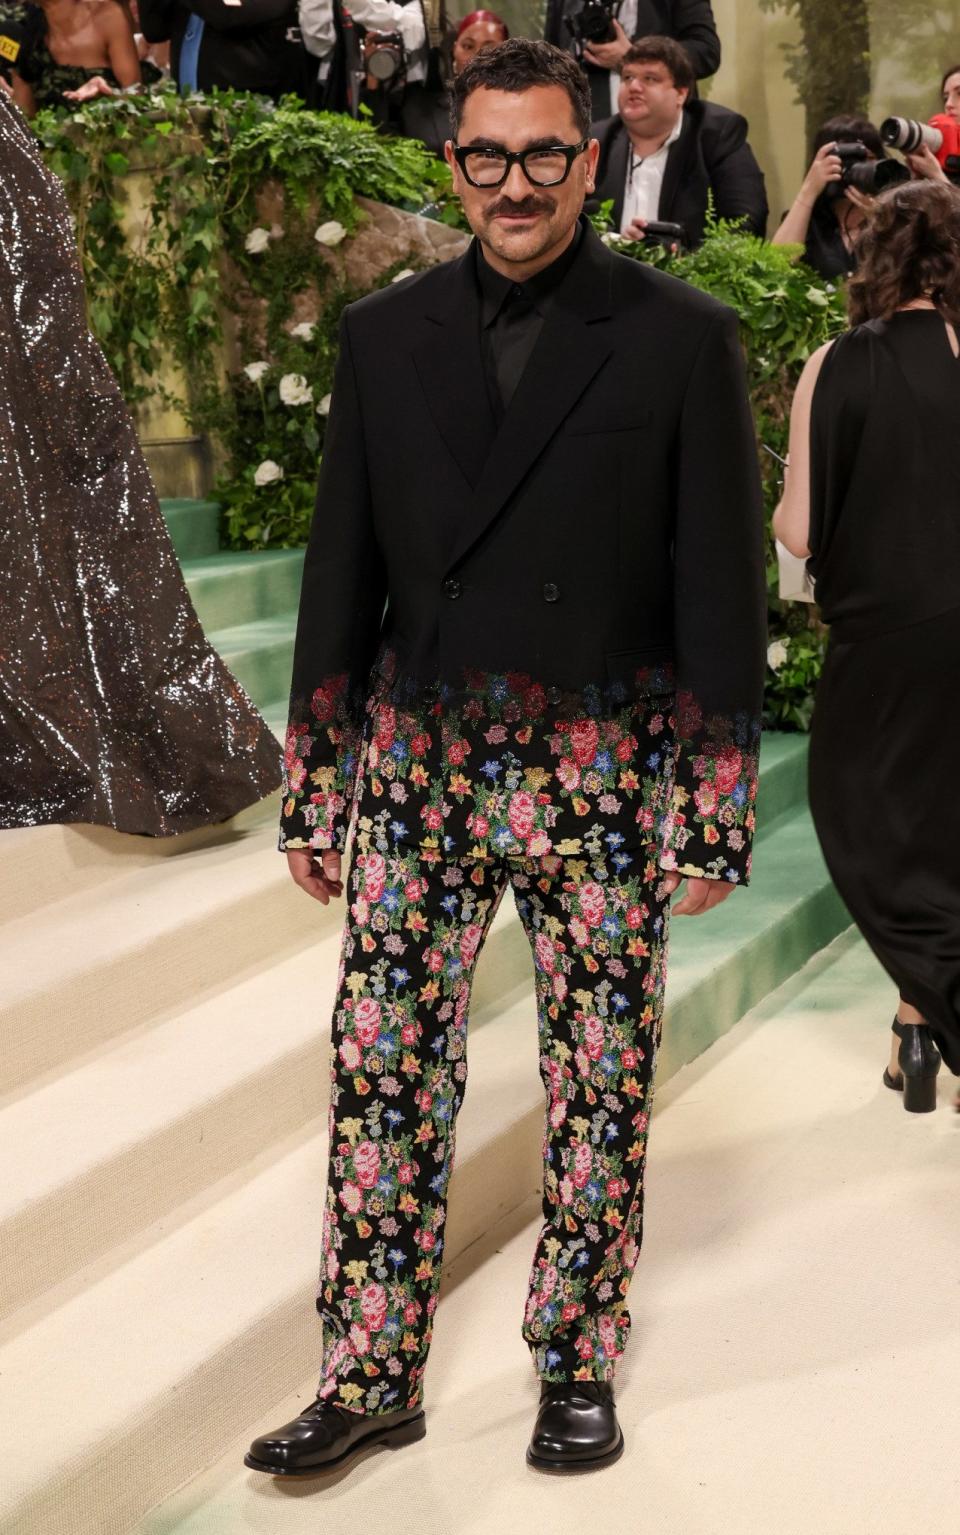 Dan Levy wore an ombre-effect suit by Loewe with a floral lower half